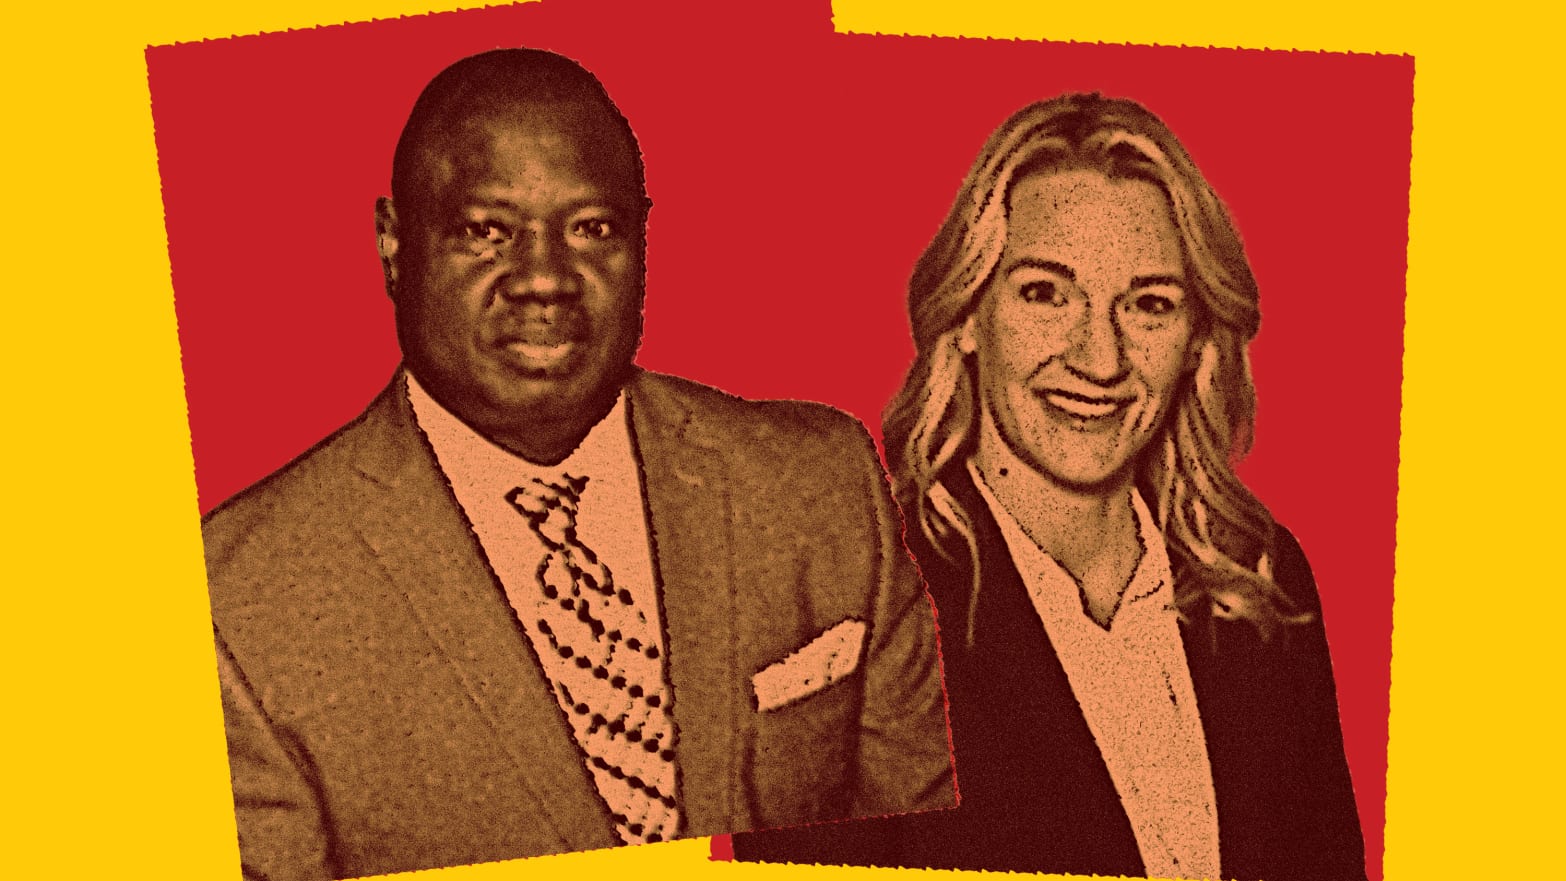 Photo illustration of Darbi Boddy and Isaac Adi on red and yellow backgrounds